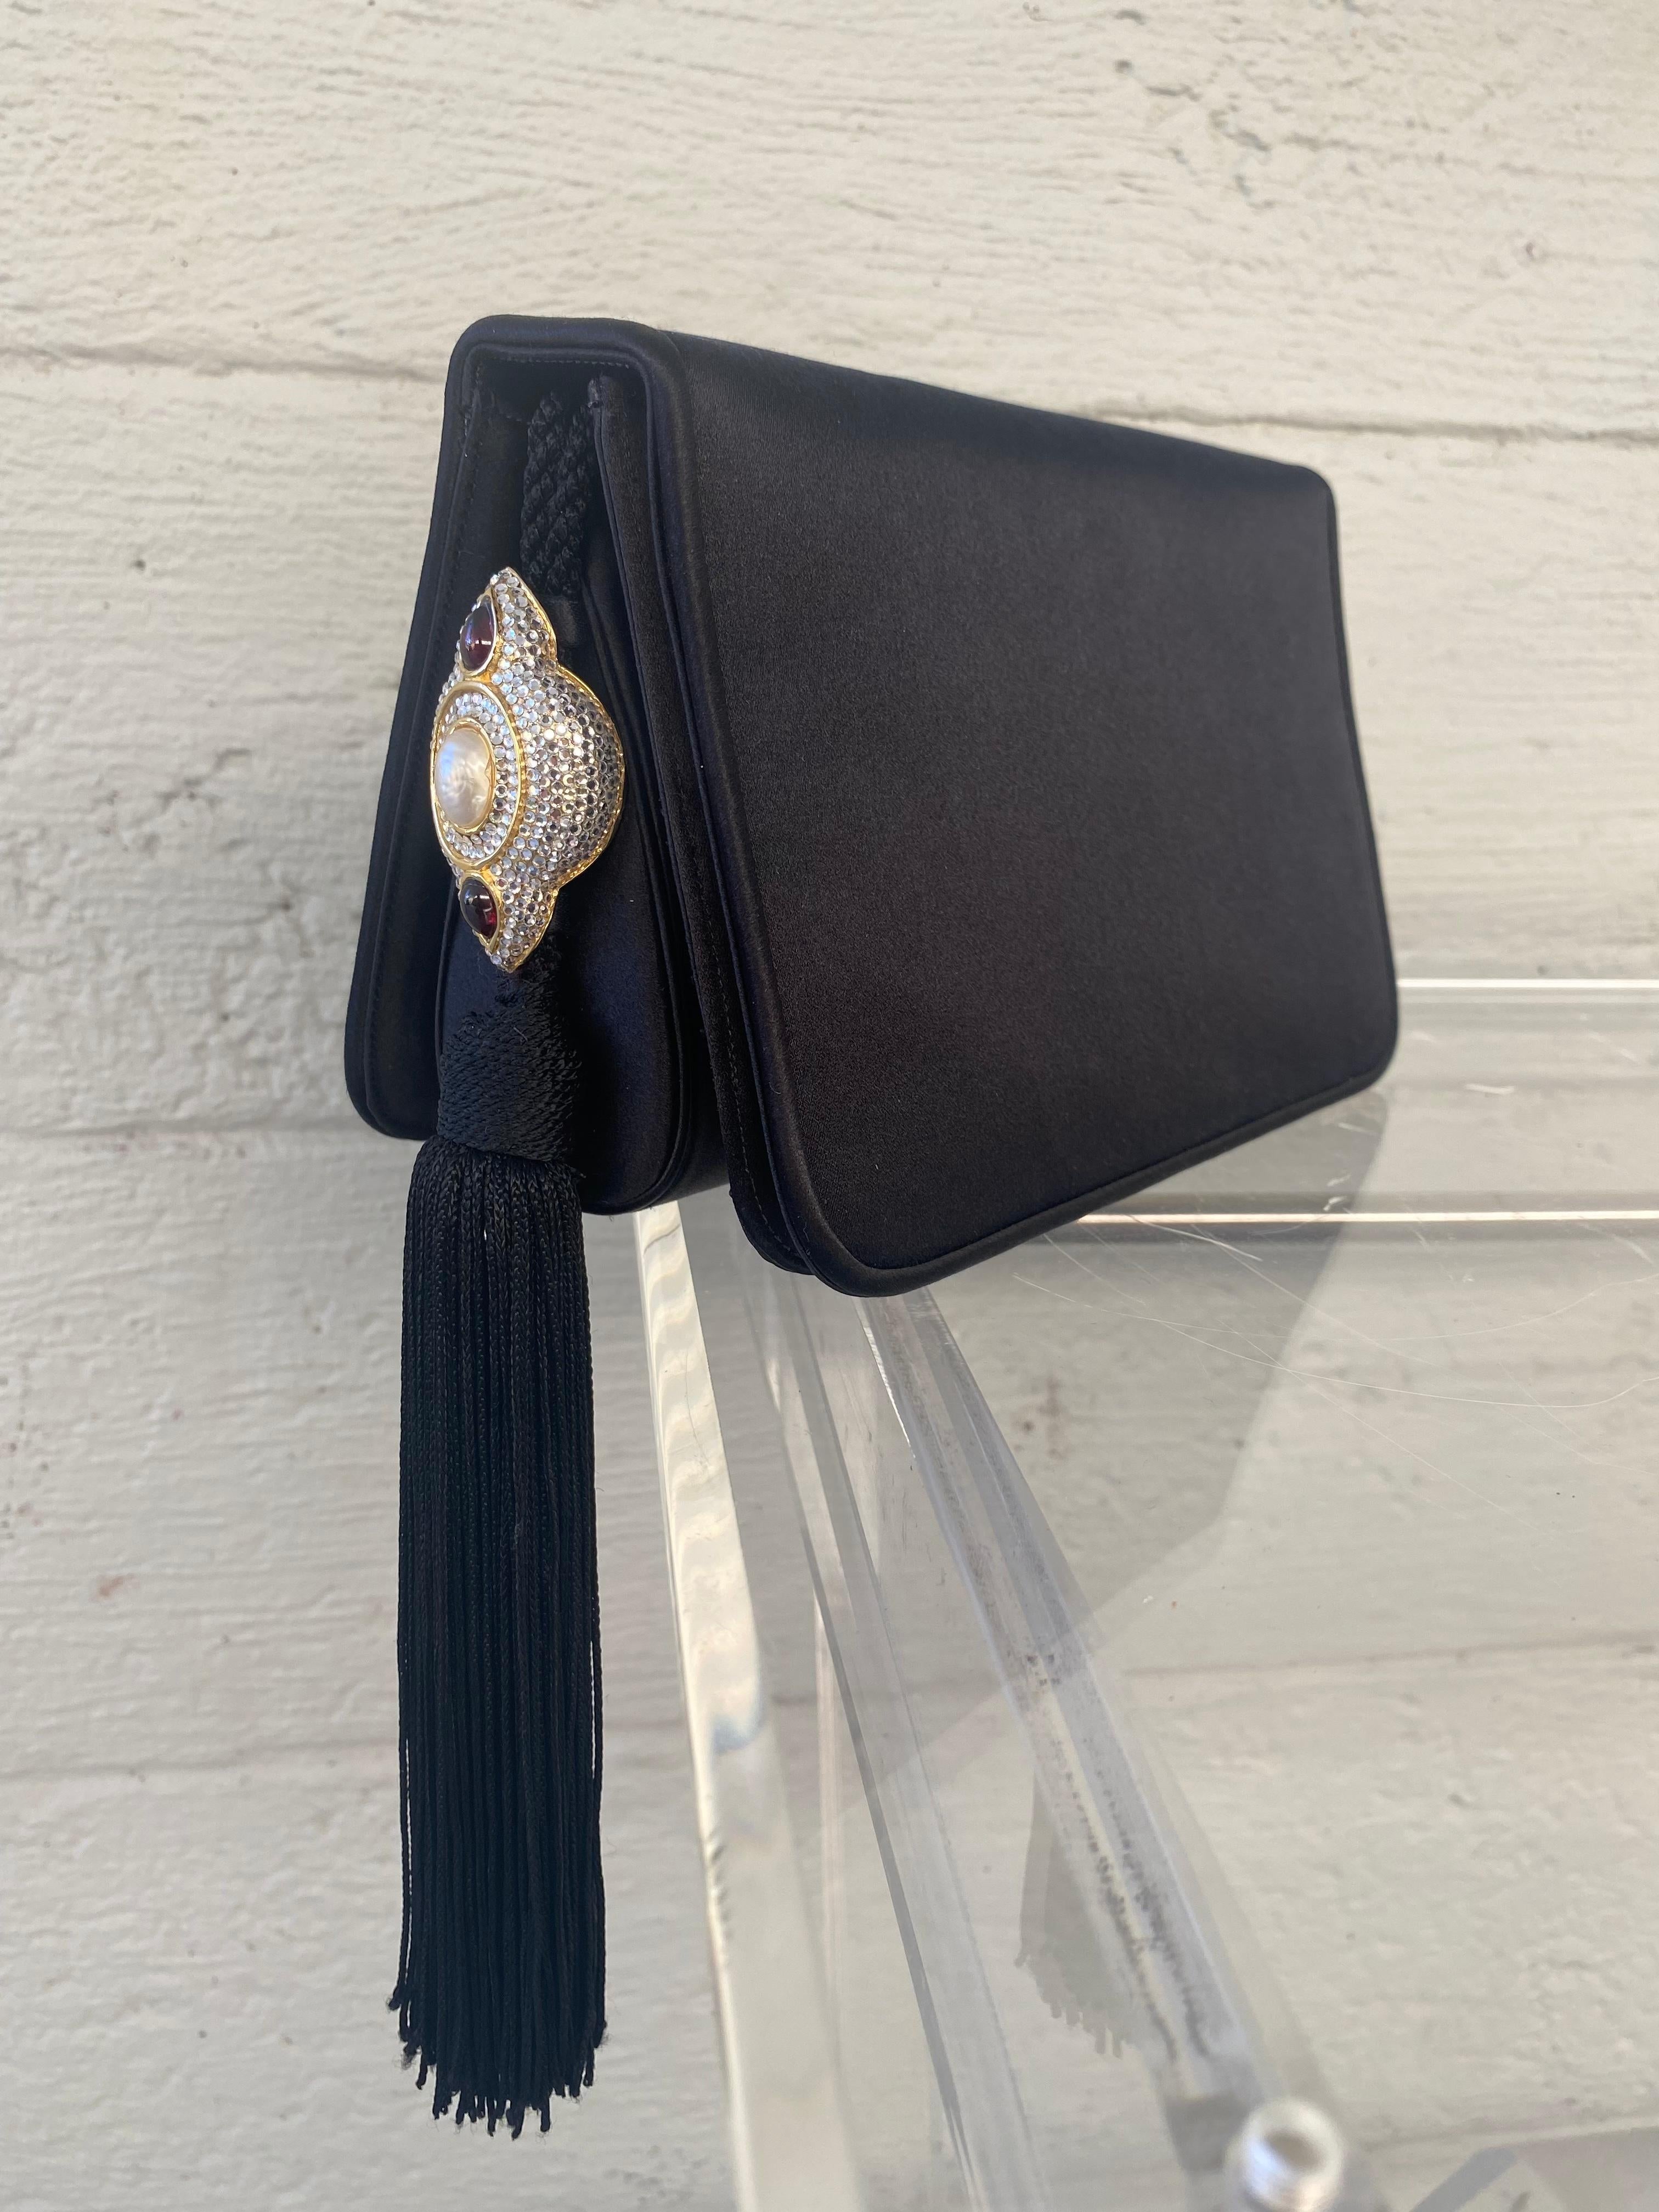 The ultimate in handbag making luxury craftsmanship. The Iconic House of Judith Leiber always provides us with timeless and classic pieces. This beautiful bag takes timeless creation to a new level of sophistication and charm. Made from the finest